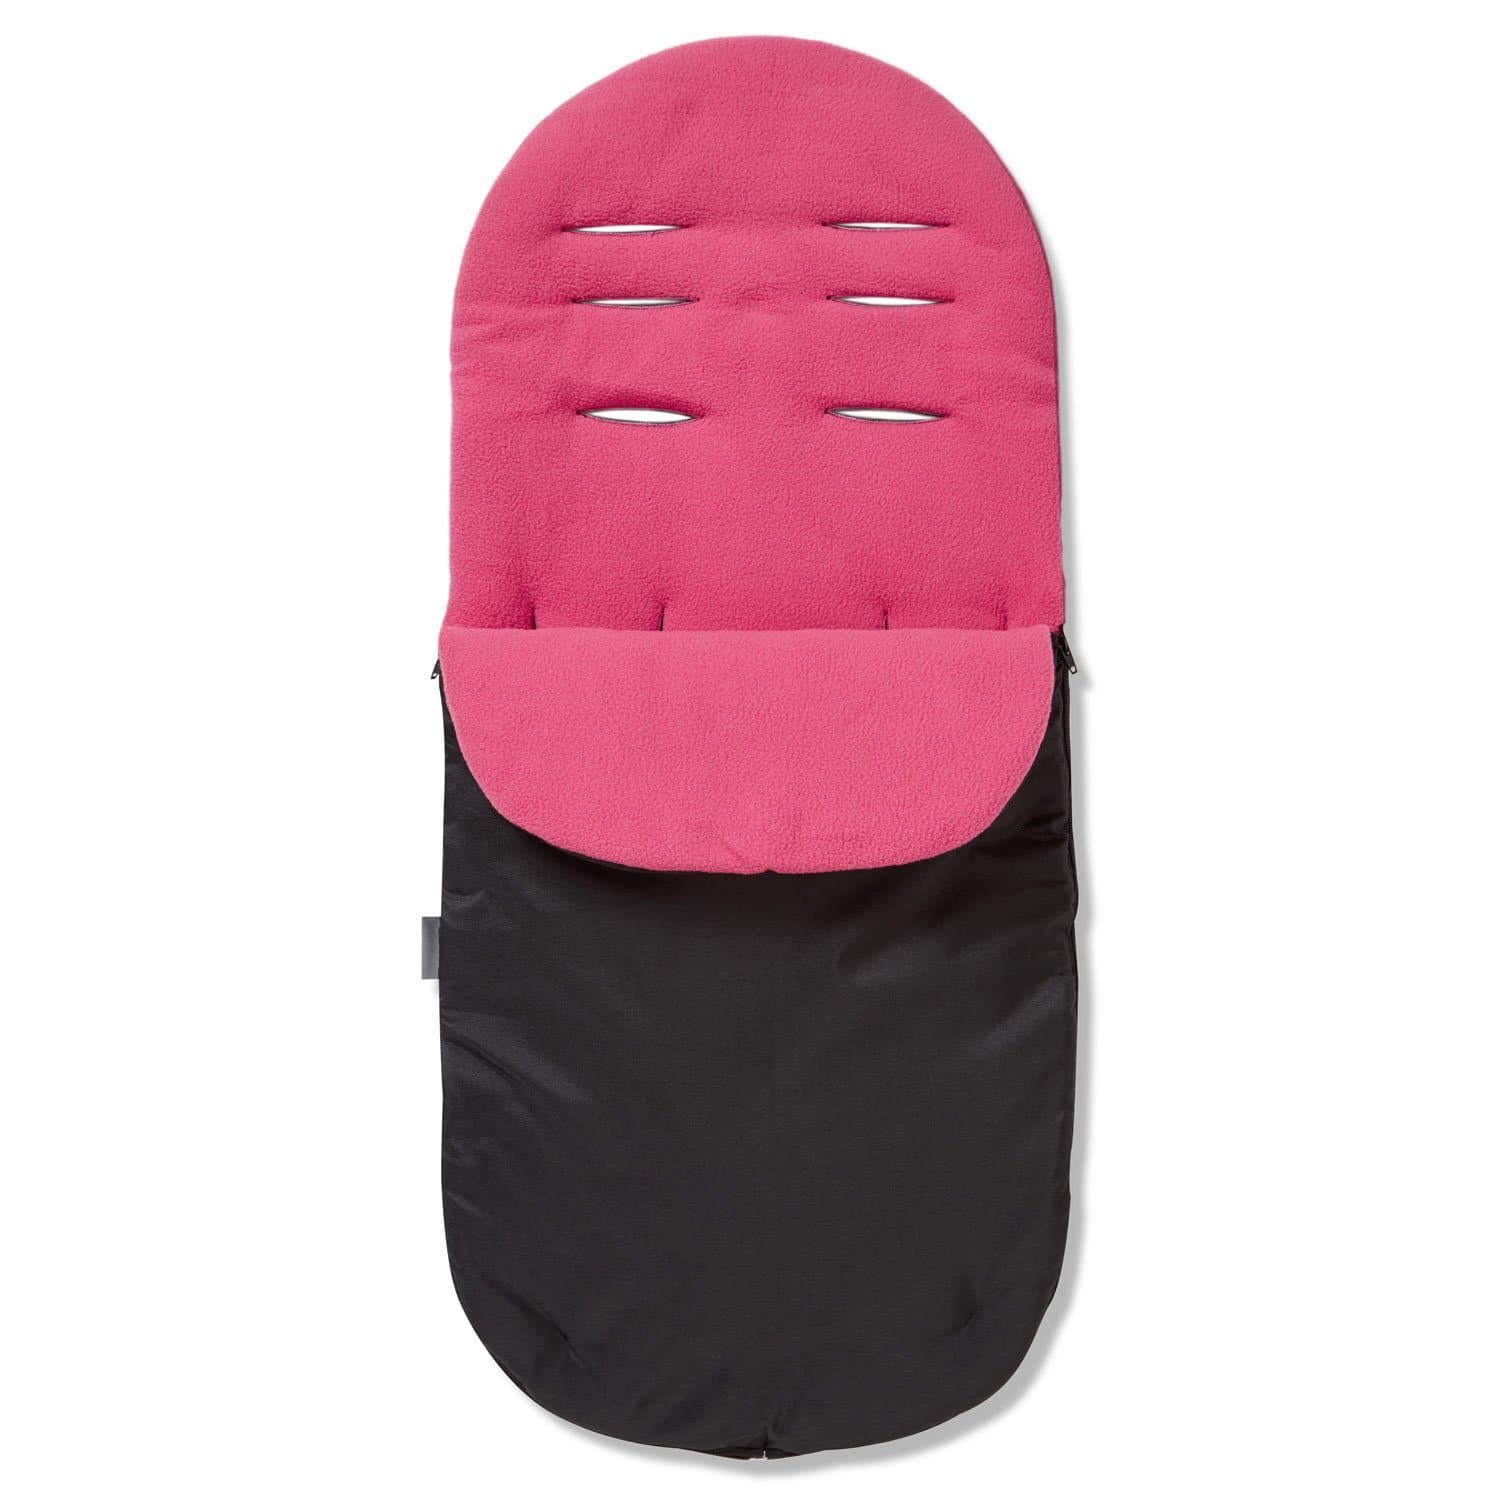 Footmuff / Cosy Toes Compatible with Excel - Dark Pink / Fits All Models | For Your Little One